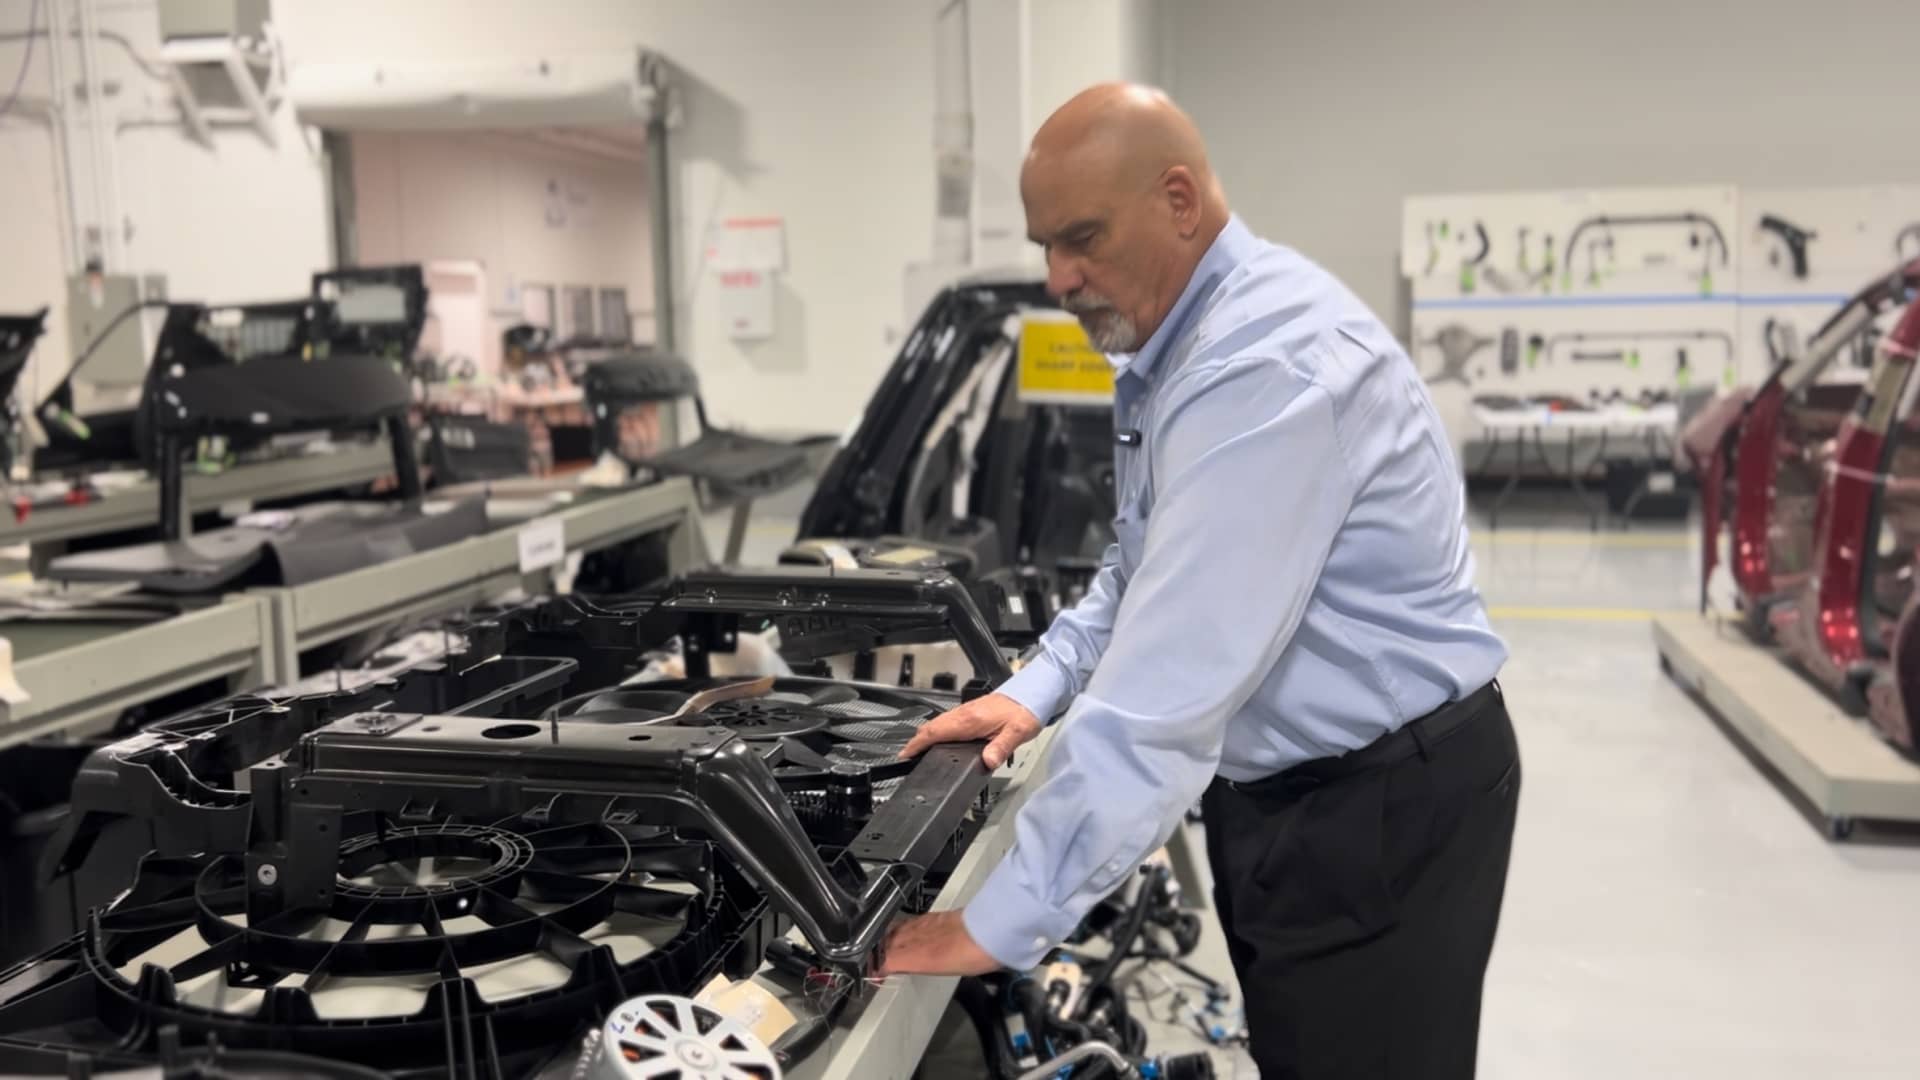 Terry Woychowski, president of automotive at engineering consulting firm Caresoft Global, inside the company's large teardown and benchmarking facility in Livonia, Michigan.